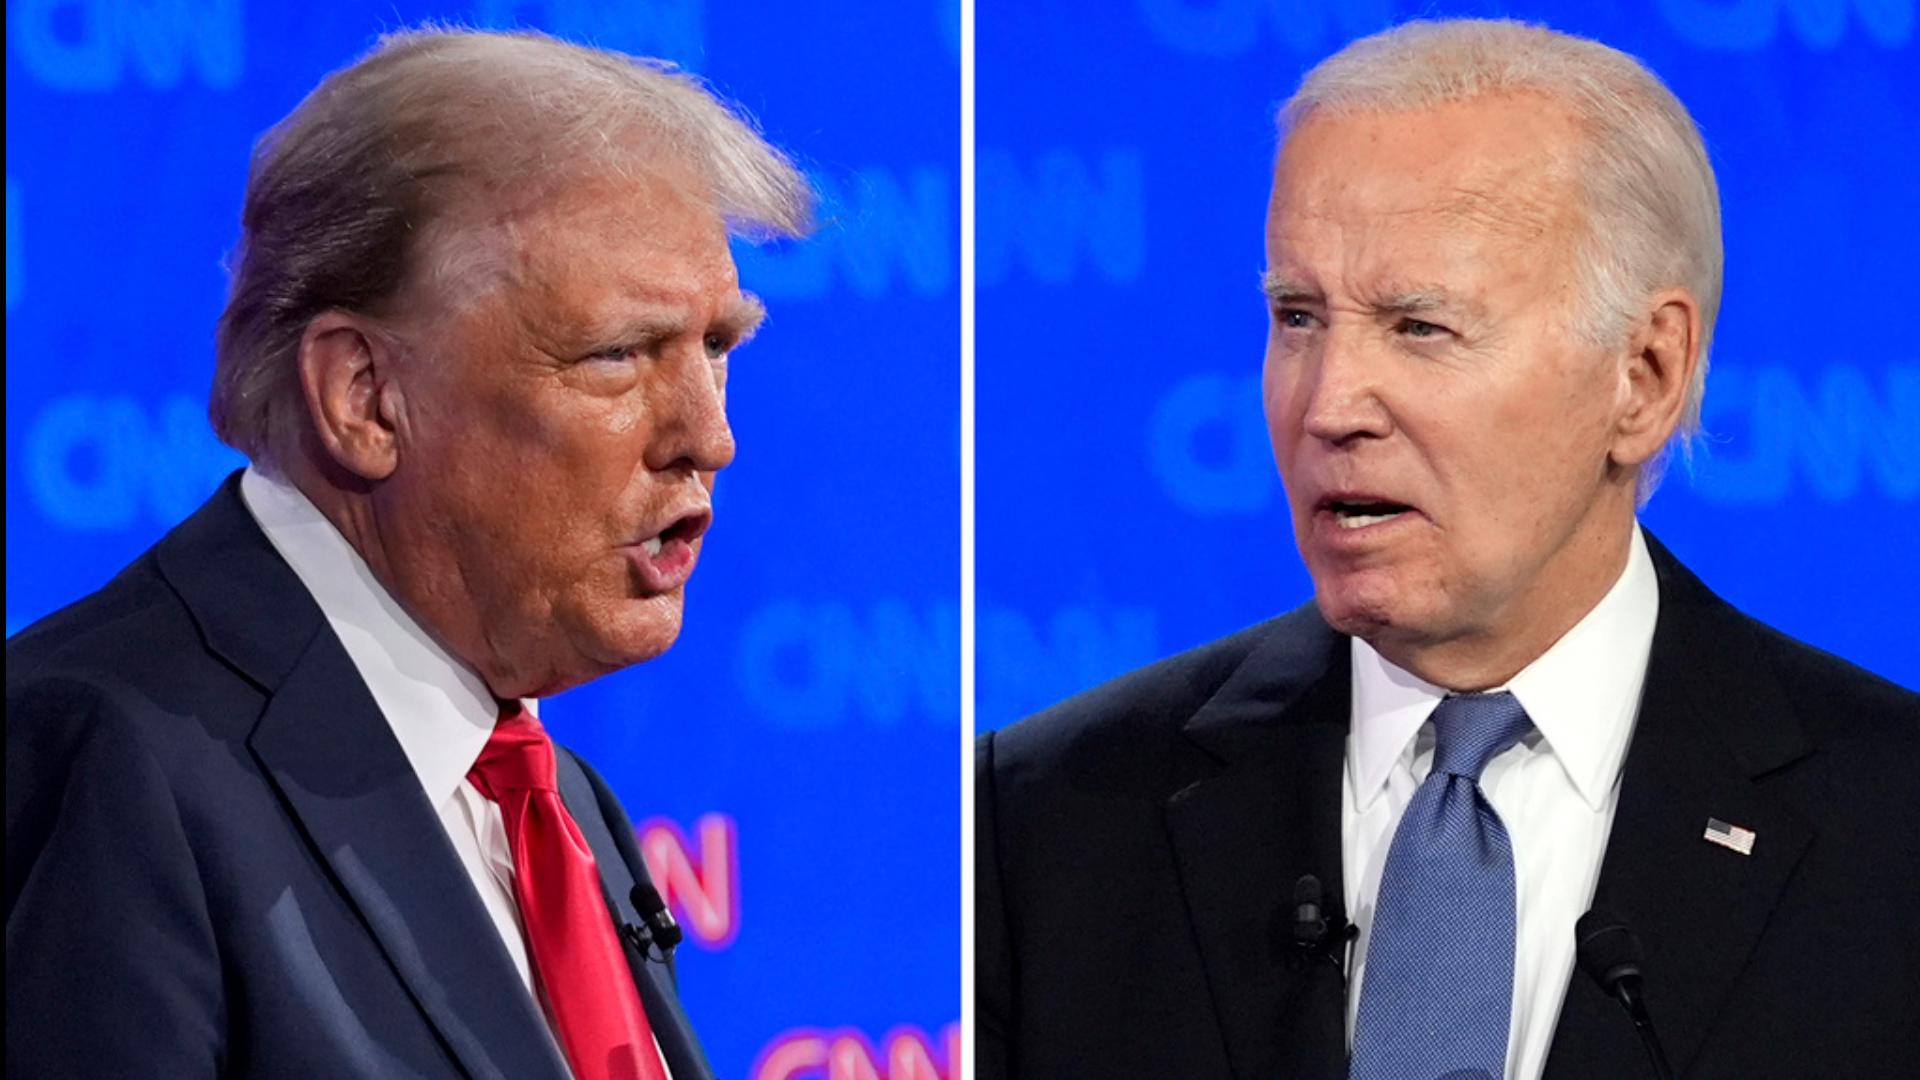 VERIFY fact-checked claims from presidential candidates Donald Trump and Joe Biden during their first debate for the 2024 general election.